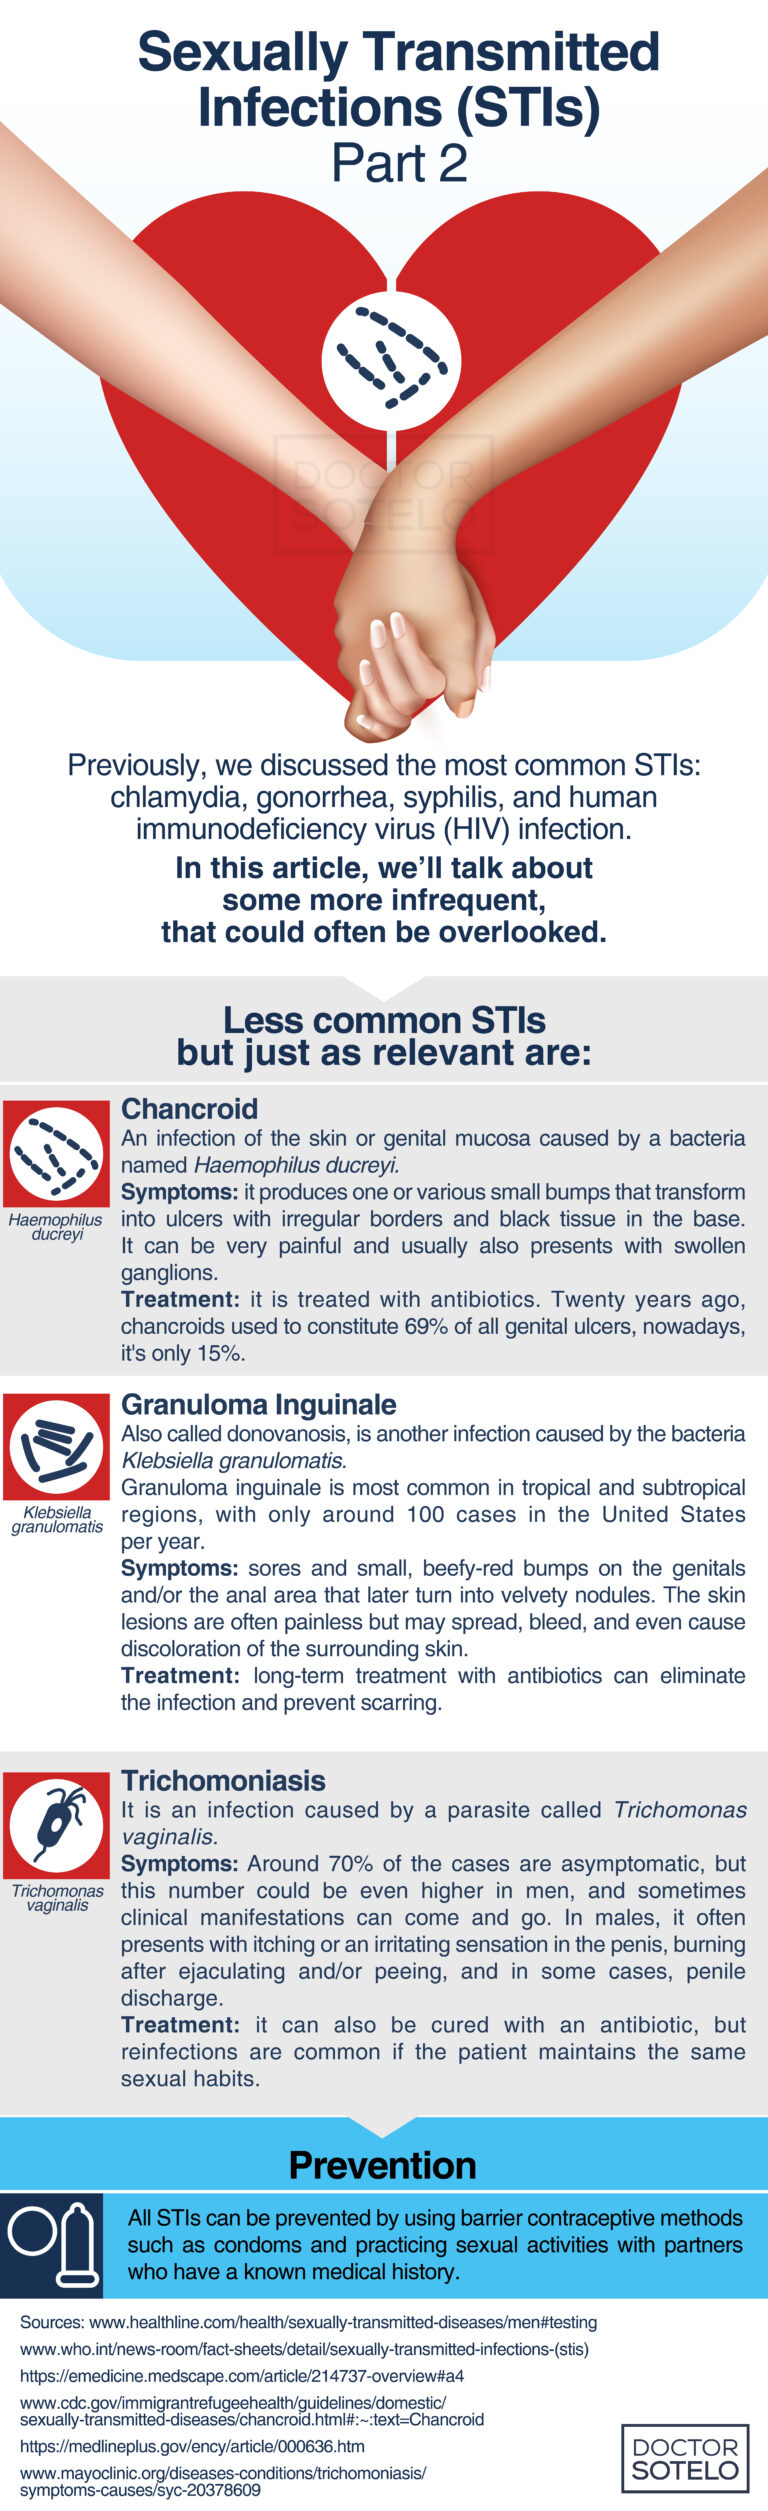 SEXUALLY TRANSMITTED INFECTIONS (STIs) PART 2